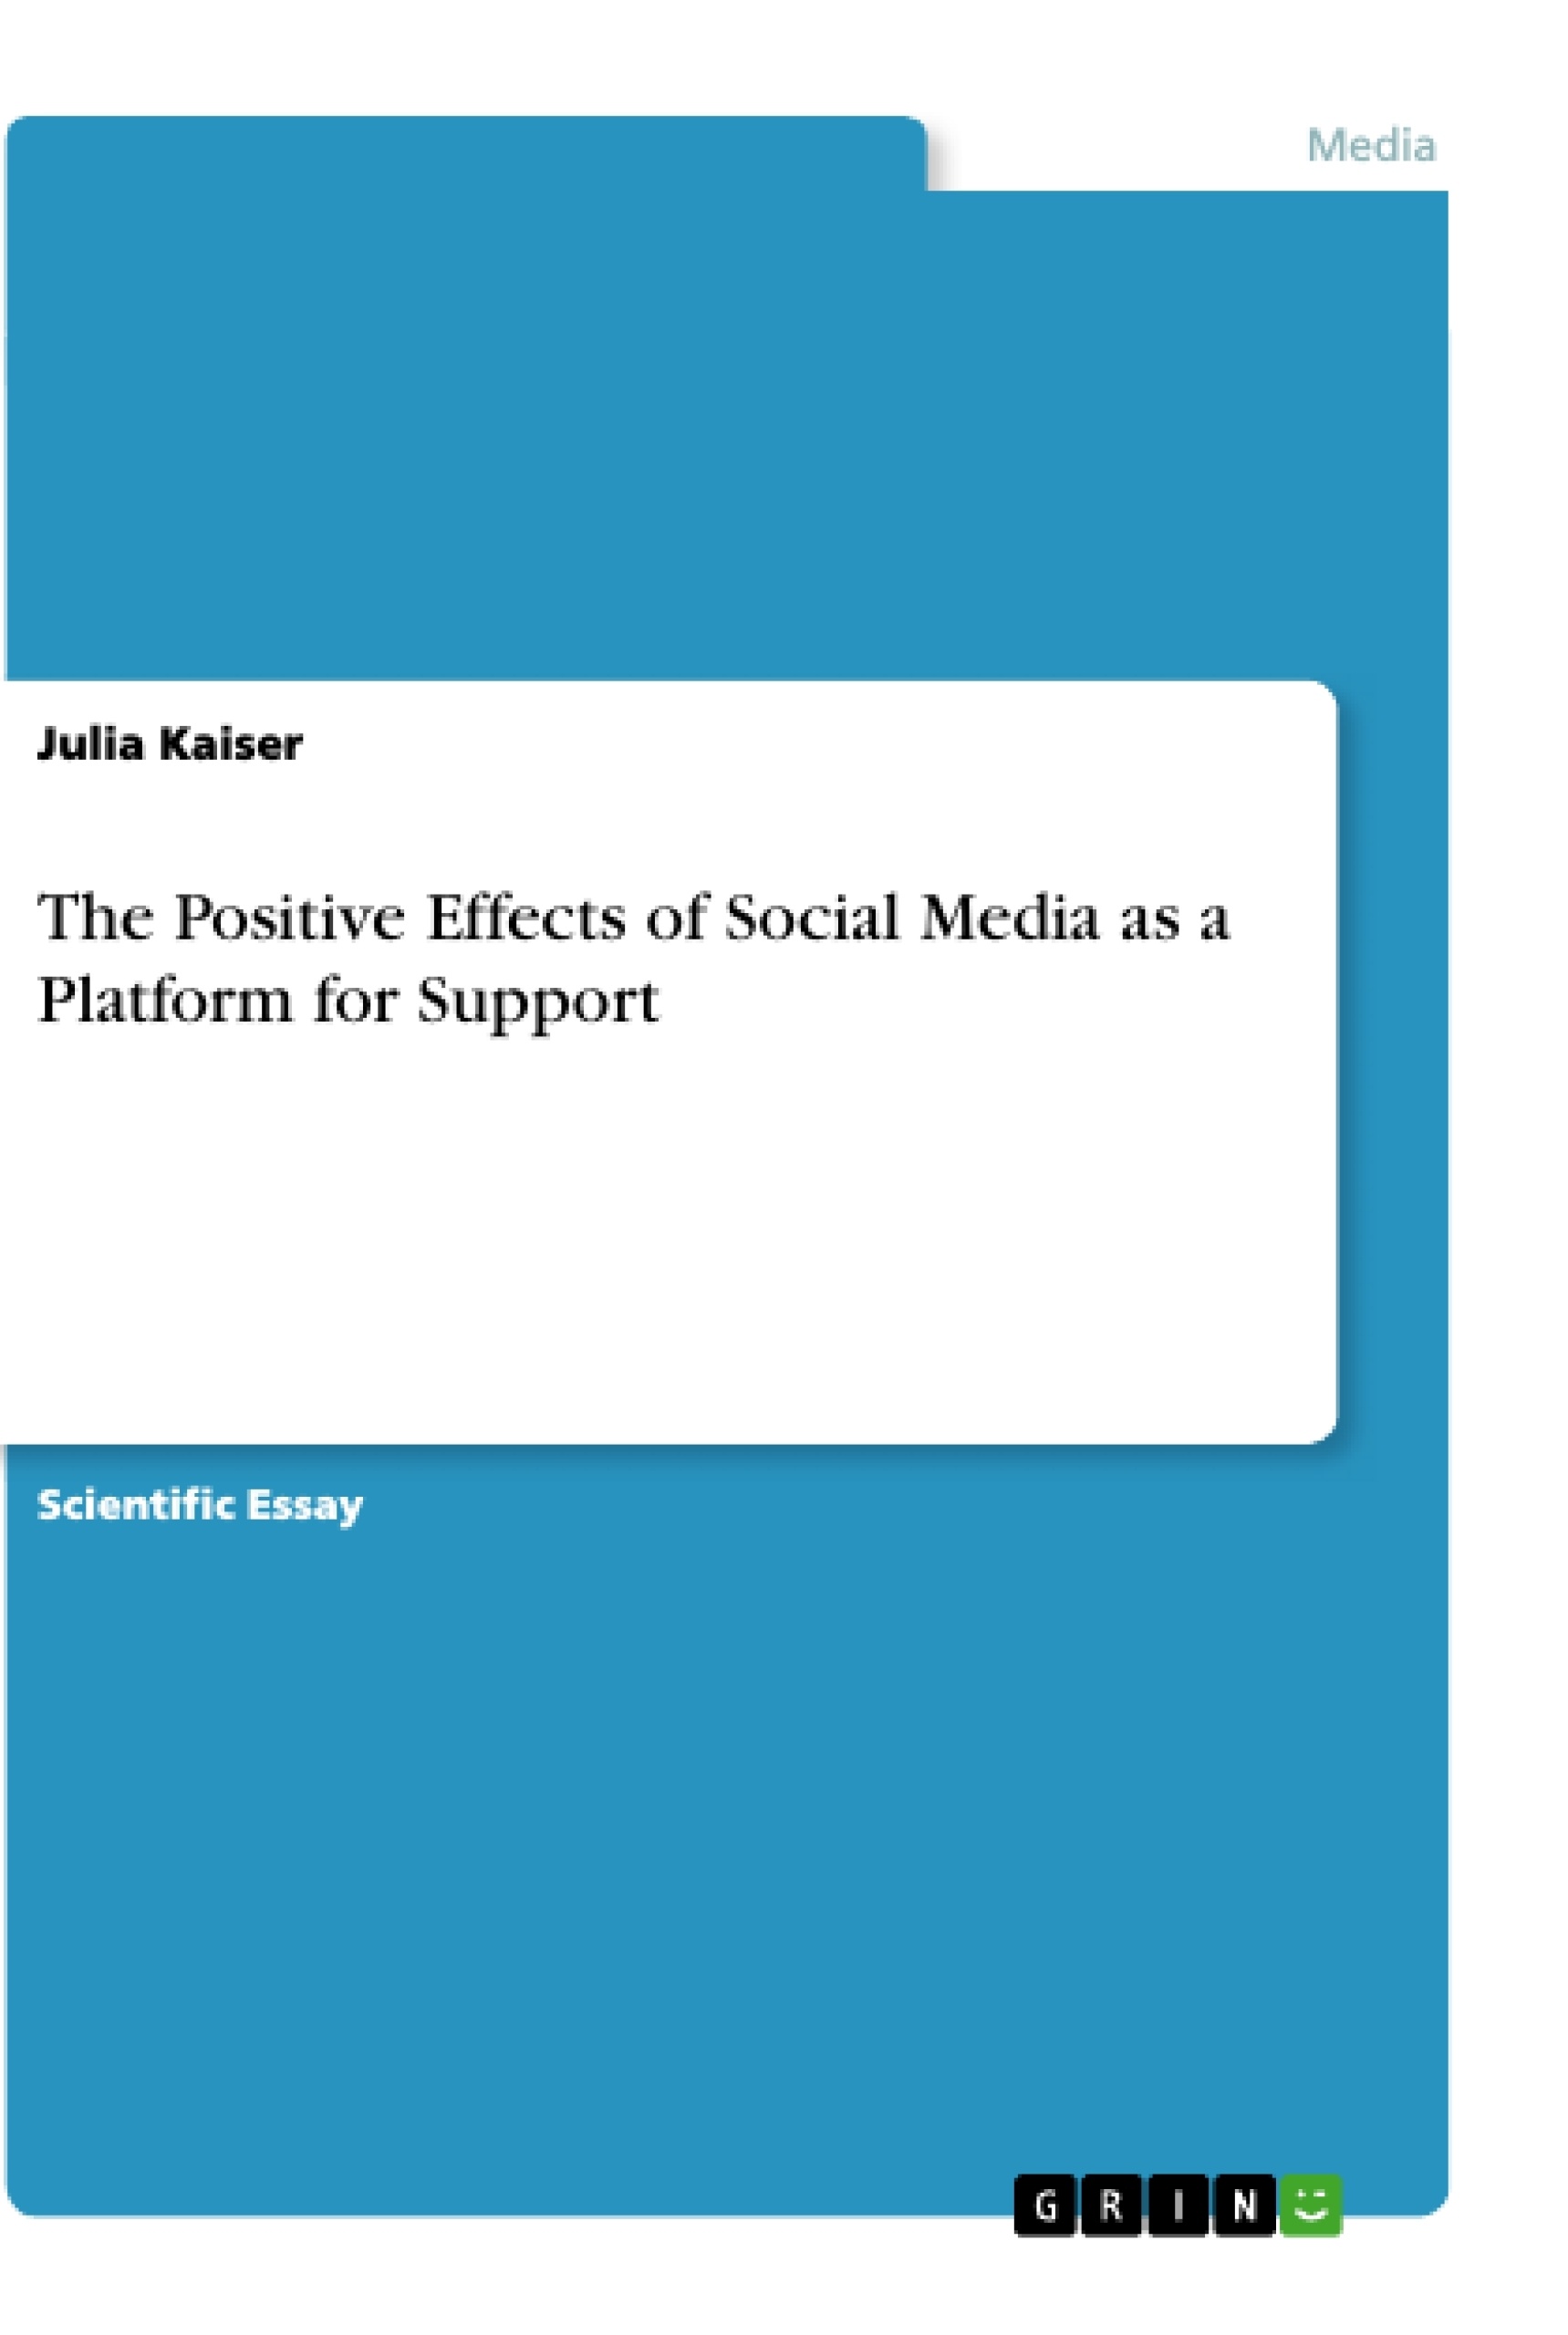 Title: The Positive Effects of Social Media as a Platform for Support